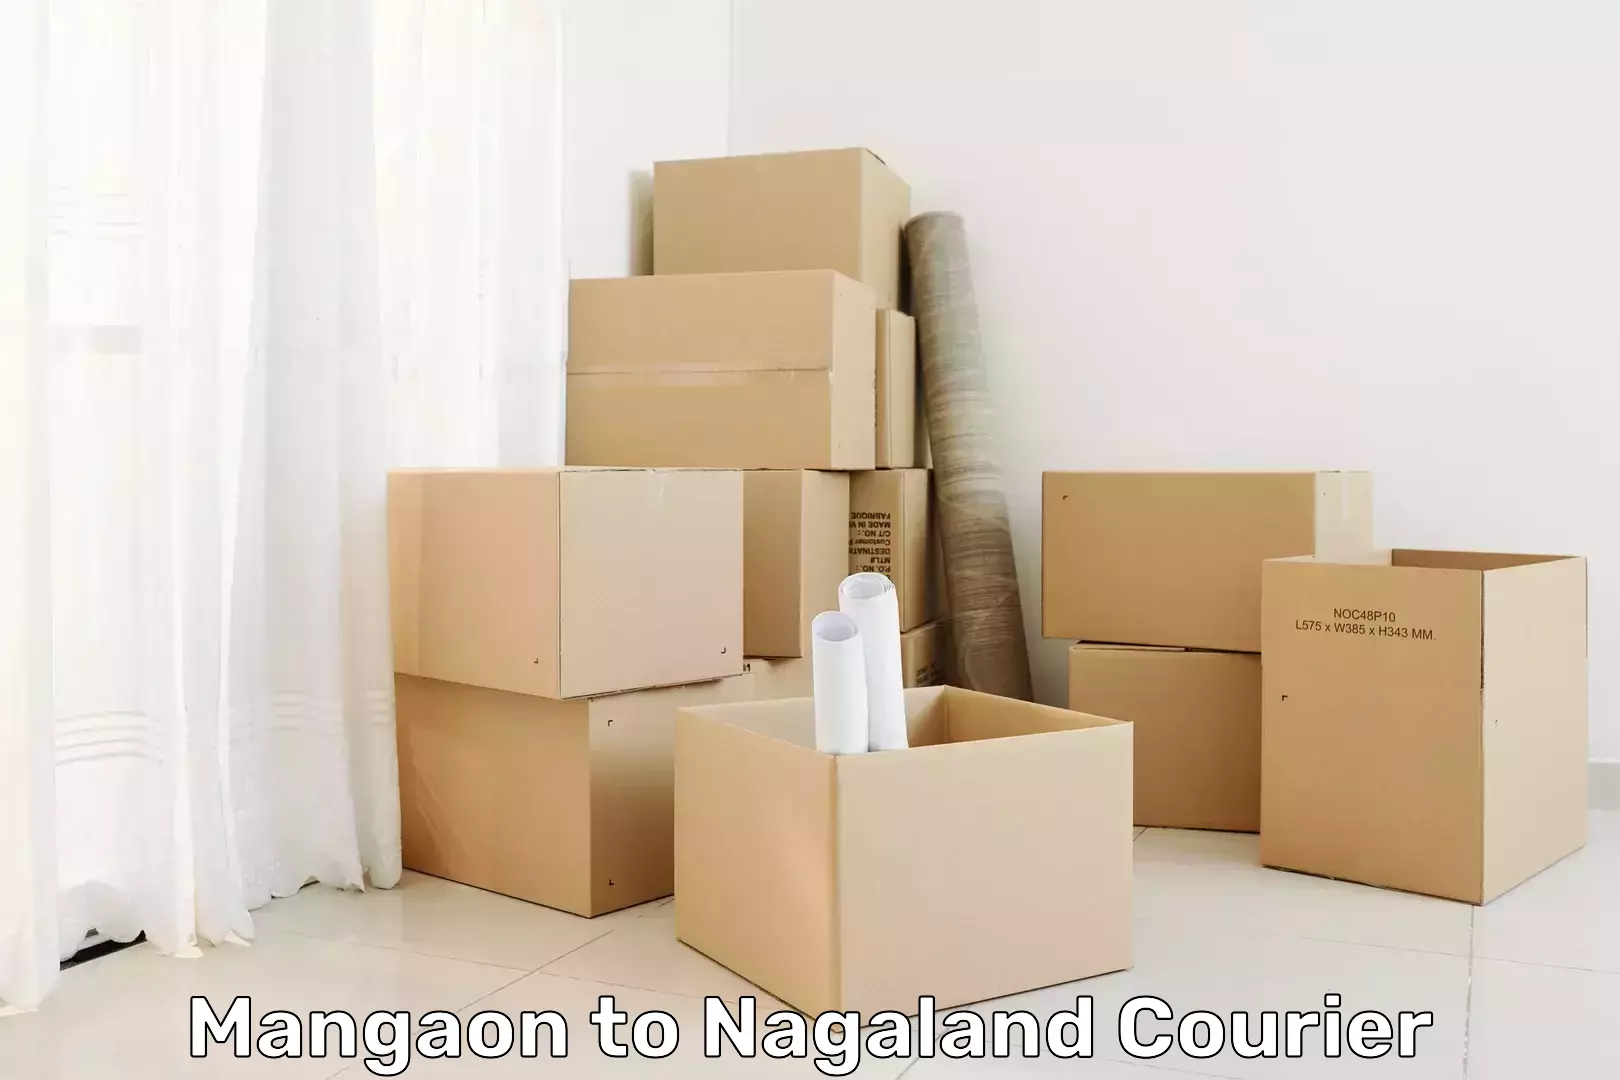 Residential courier service Mangaon to Nagaland